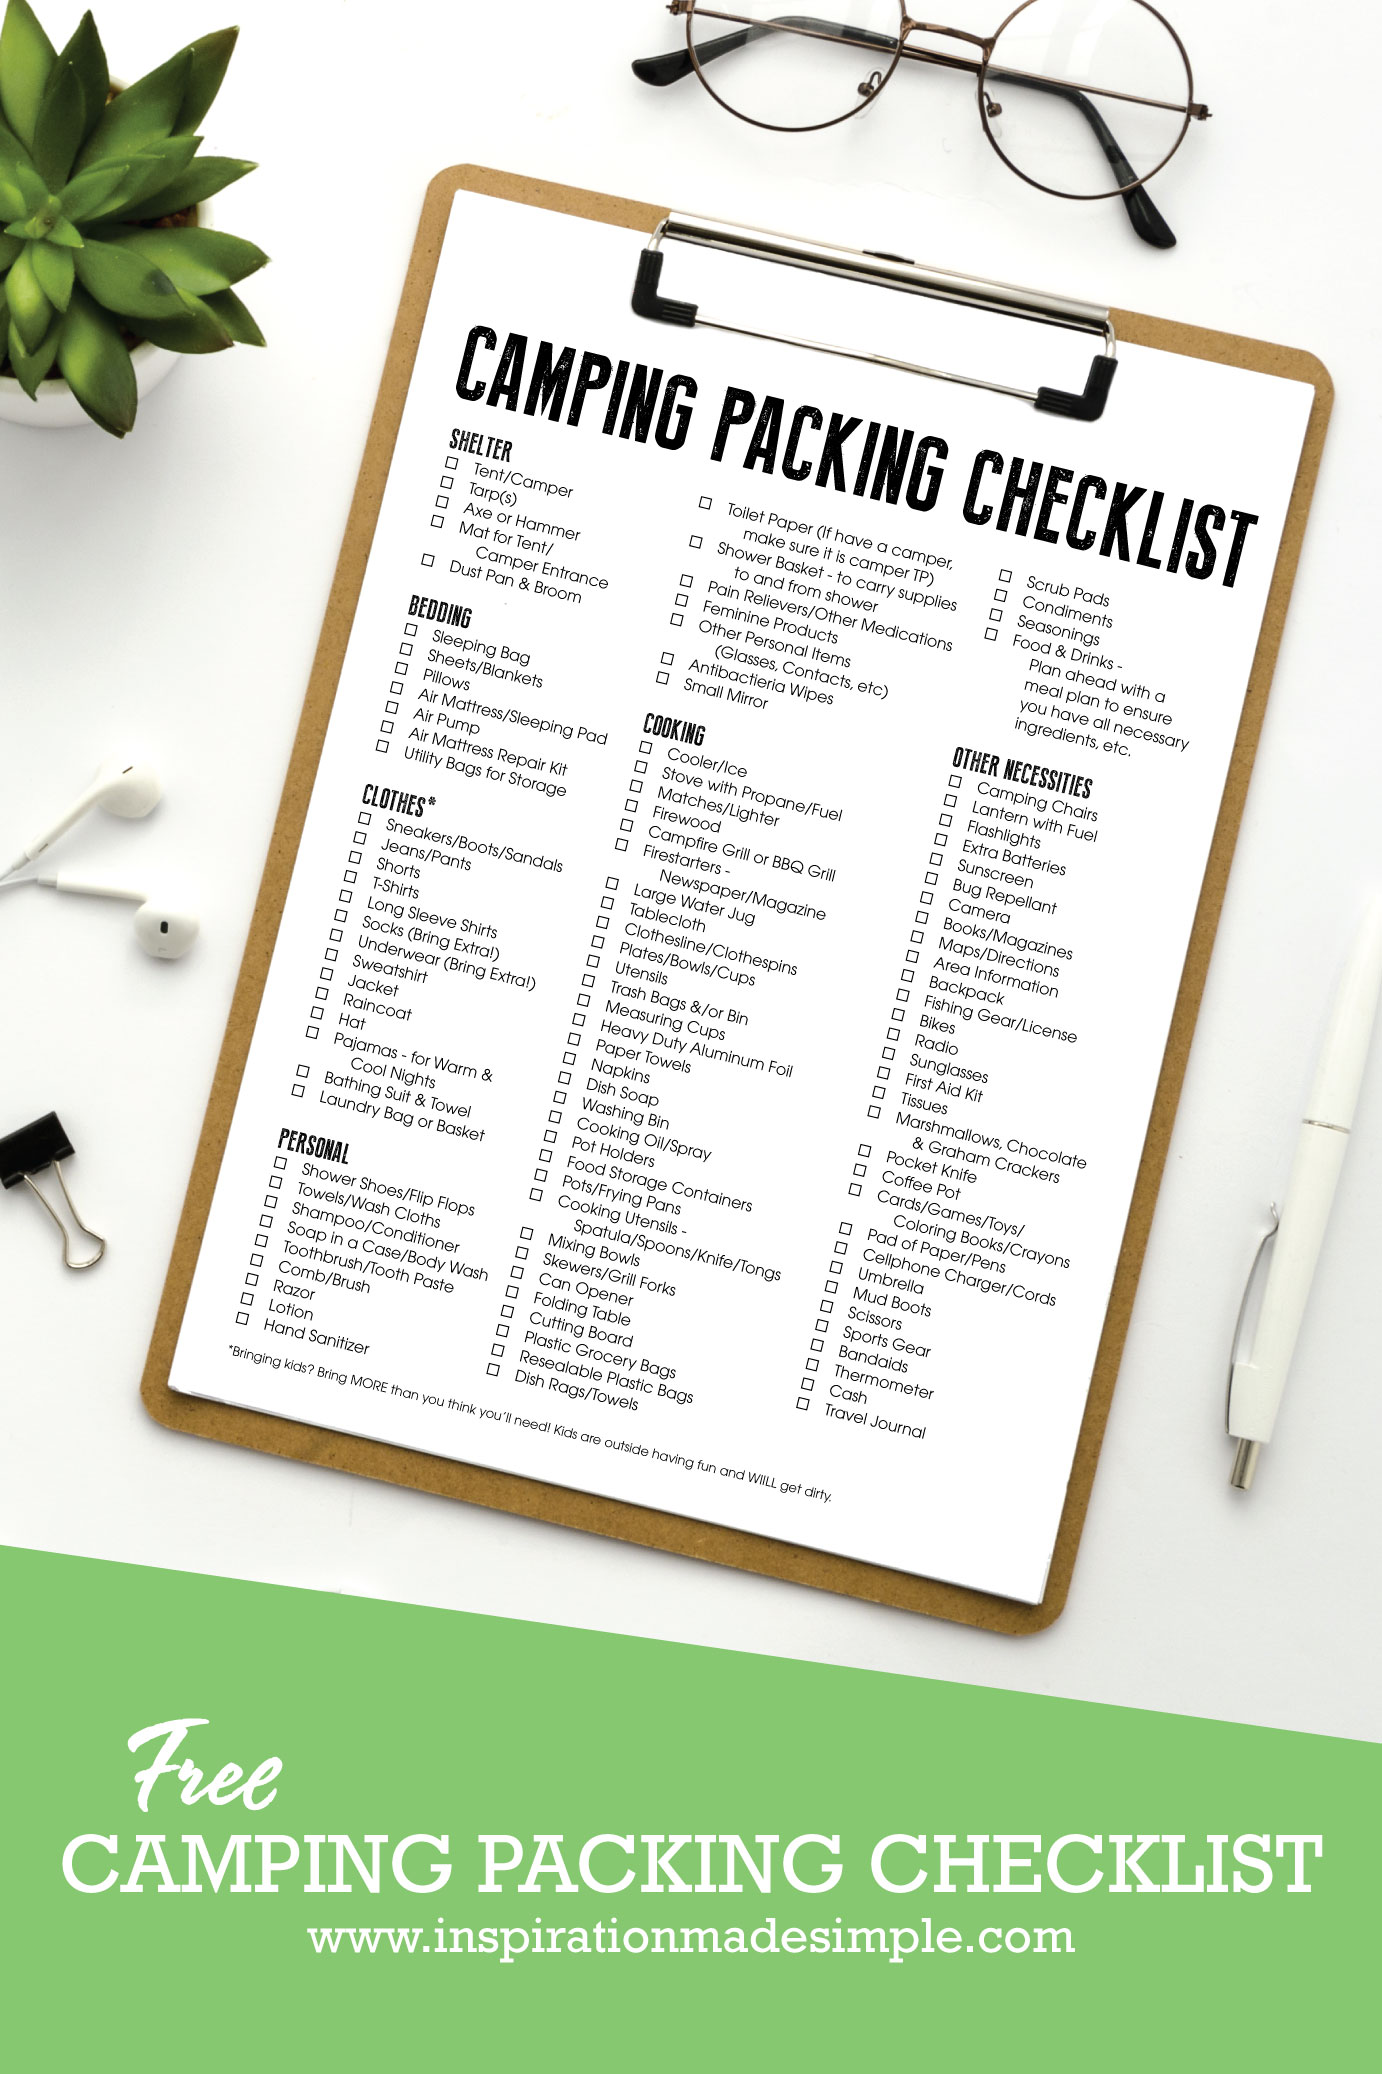 https://www.inspirationmadesimple.com/wp-content/uploads/2020/04/camping-checklist-download.jpg